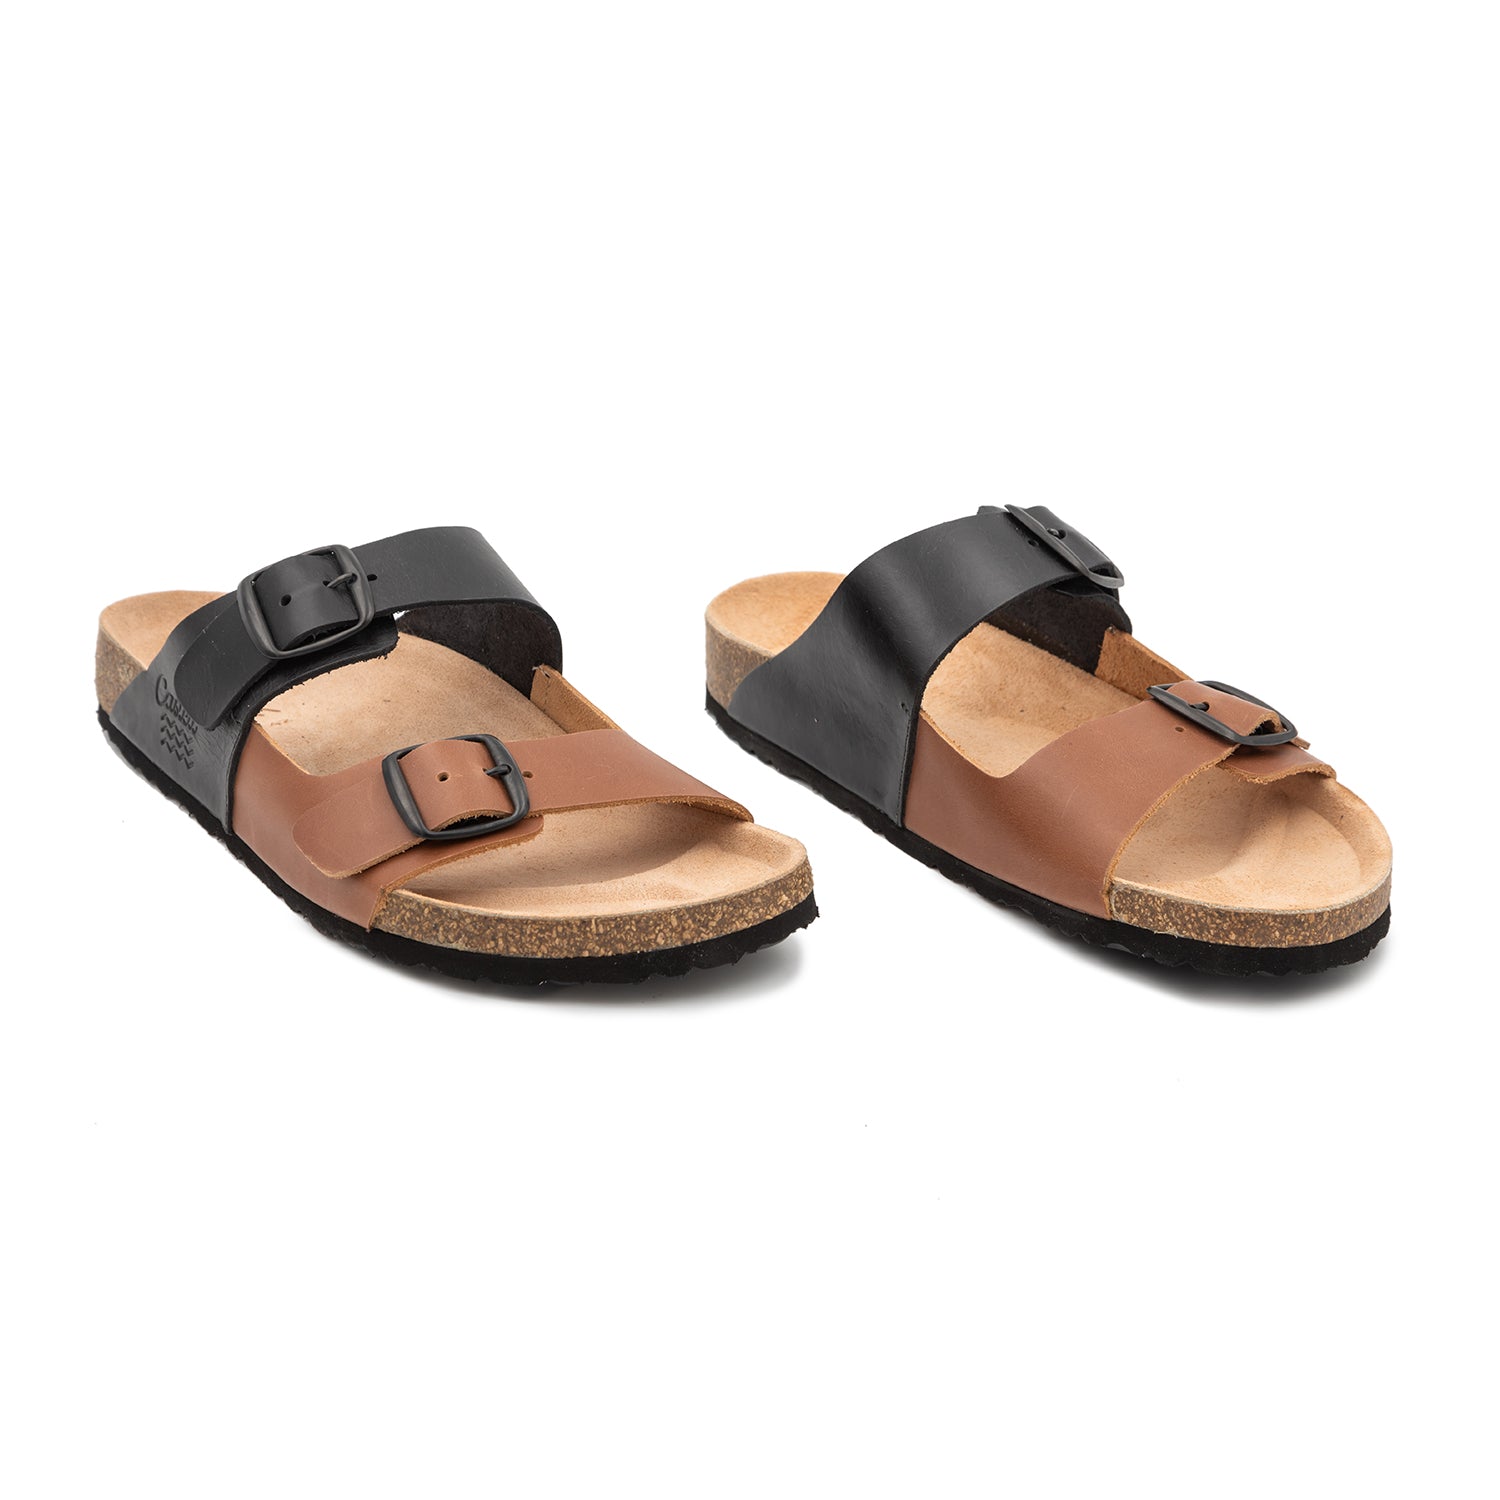 Leather Sandal With Open Toe for Men - 1727 Greco Picaso